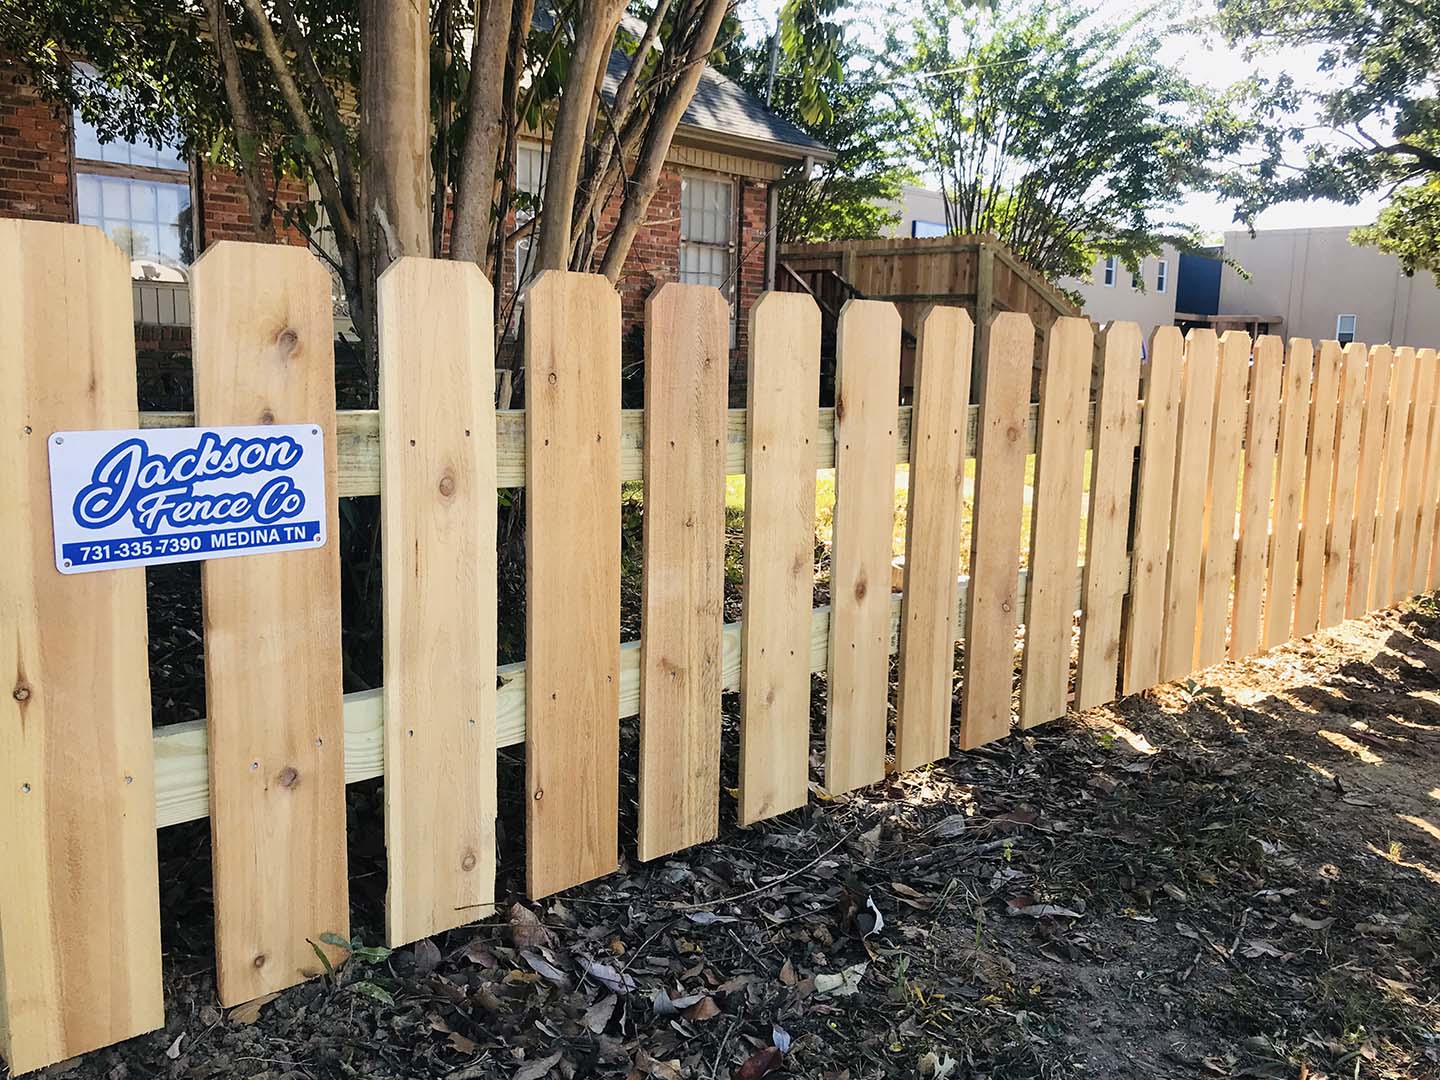 Wood Dog Fencing in Jackson Tennessee